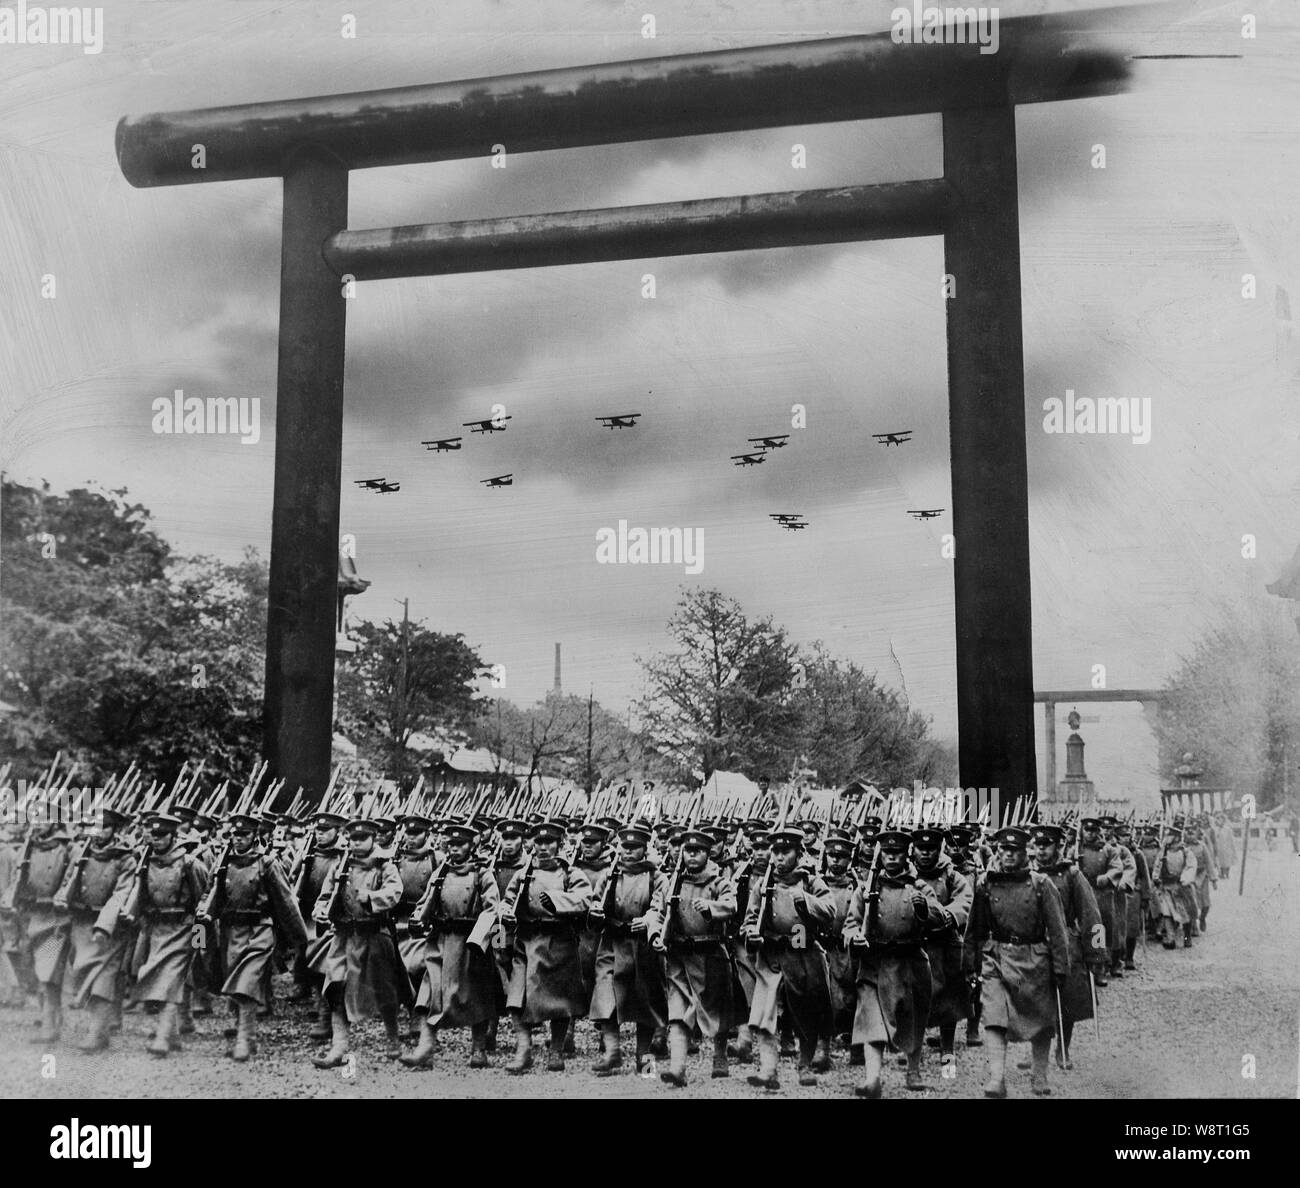 [ 1930s Japan - Japanese Imperial Army Troops at Yasukuni ] —   Troops of the Japanese Imperial Forces are lined up at Yasukuni Shinto Shrine (靖国神社), Kudan (九段), Tokyo.   The shrine was established on June 29, 1869 (Meiji 2) to commemorate the Imperial soldiers who died in the Boshin War (戊辰戦争, Boshin Senso). It was initially called Shokonsha (招魂社), but renamed Yasukuni Jinja on June 4, 1879 (Meiji 12). The torii dates from December 31, 1887 (Meiji 20). Stock Photo